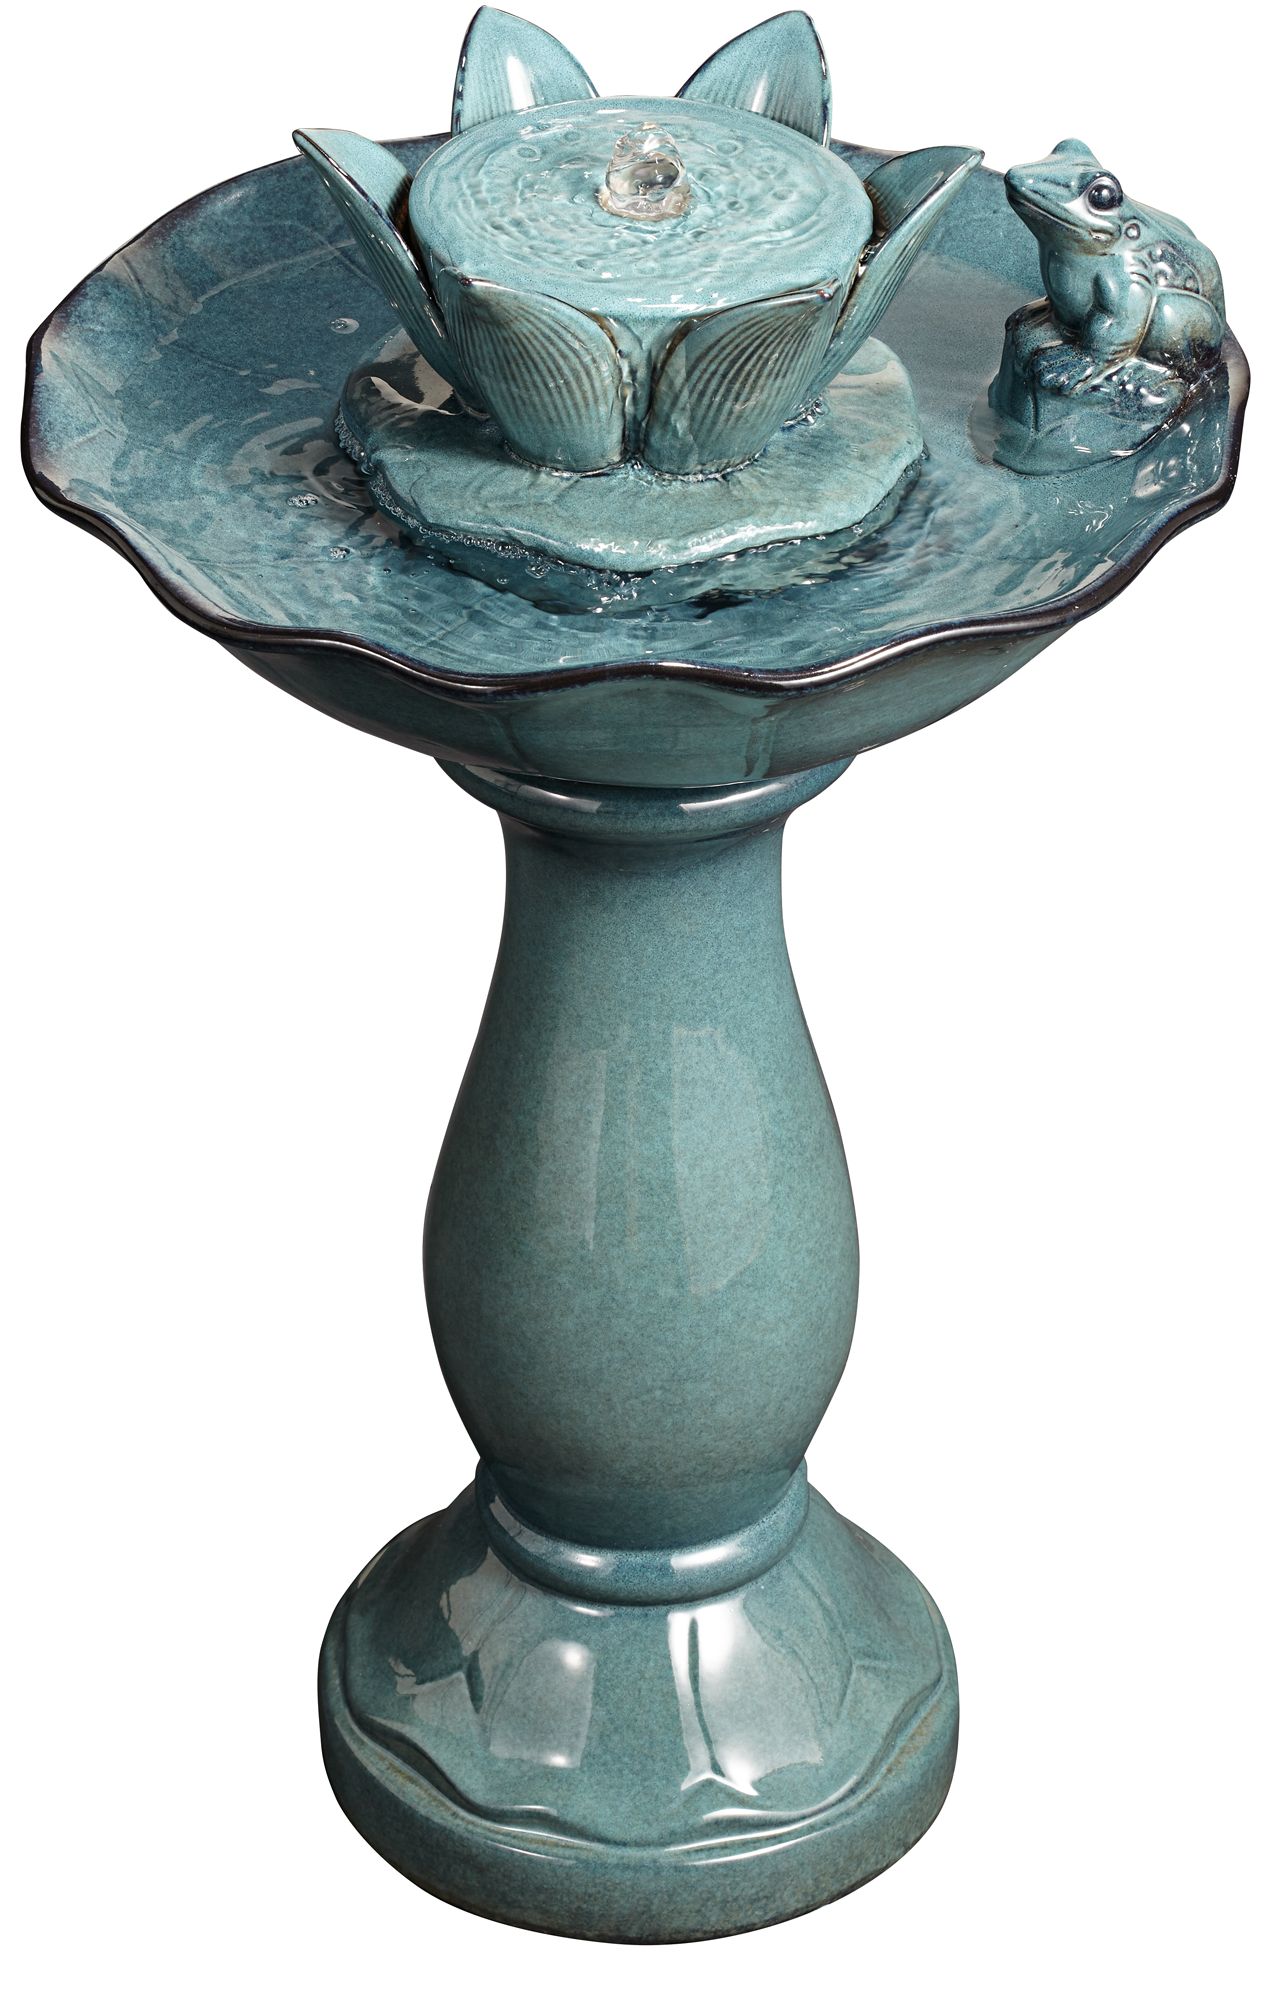 John Timberland Pleasant Pond Modern Bubbler Lotus Flower Outdoor Floor Water Fountain 25 1/4" for Yard Garden Patio Deck Porch House Exterior - image 5 of 9